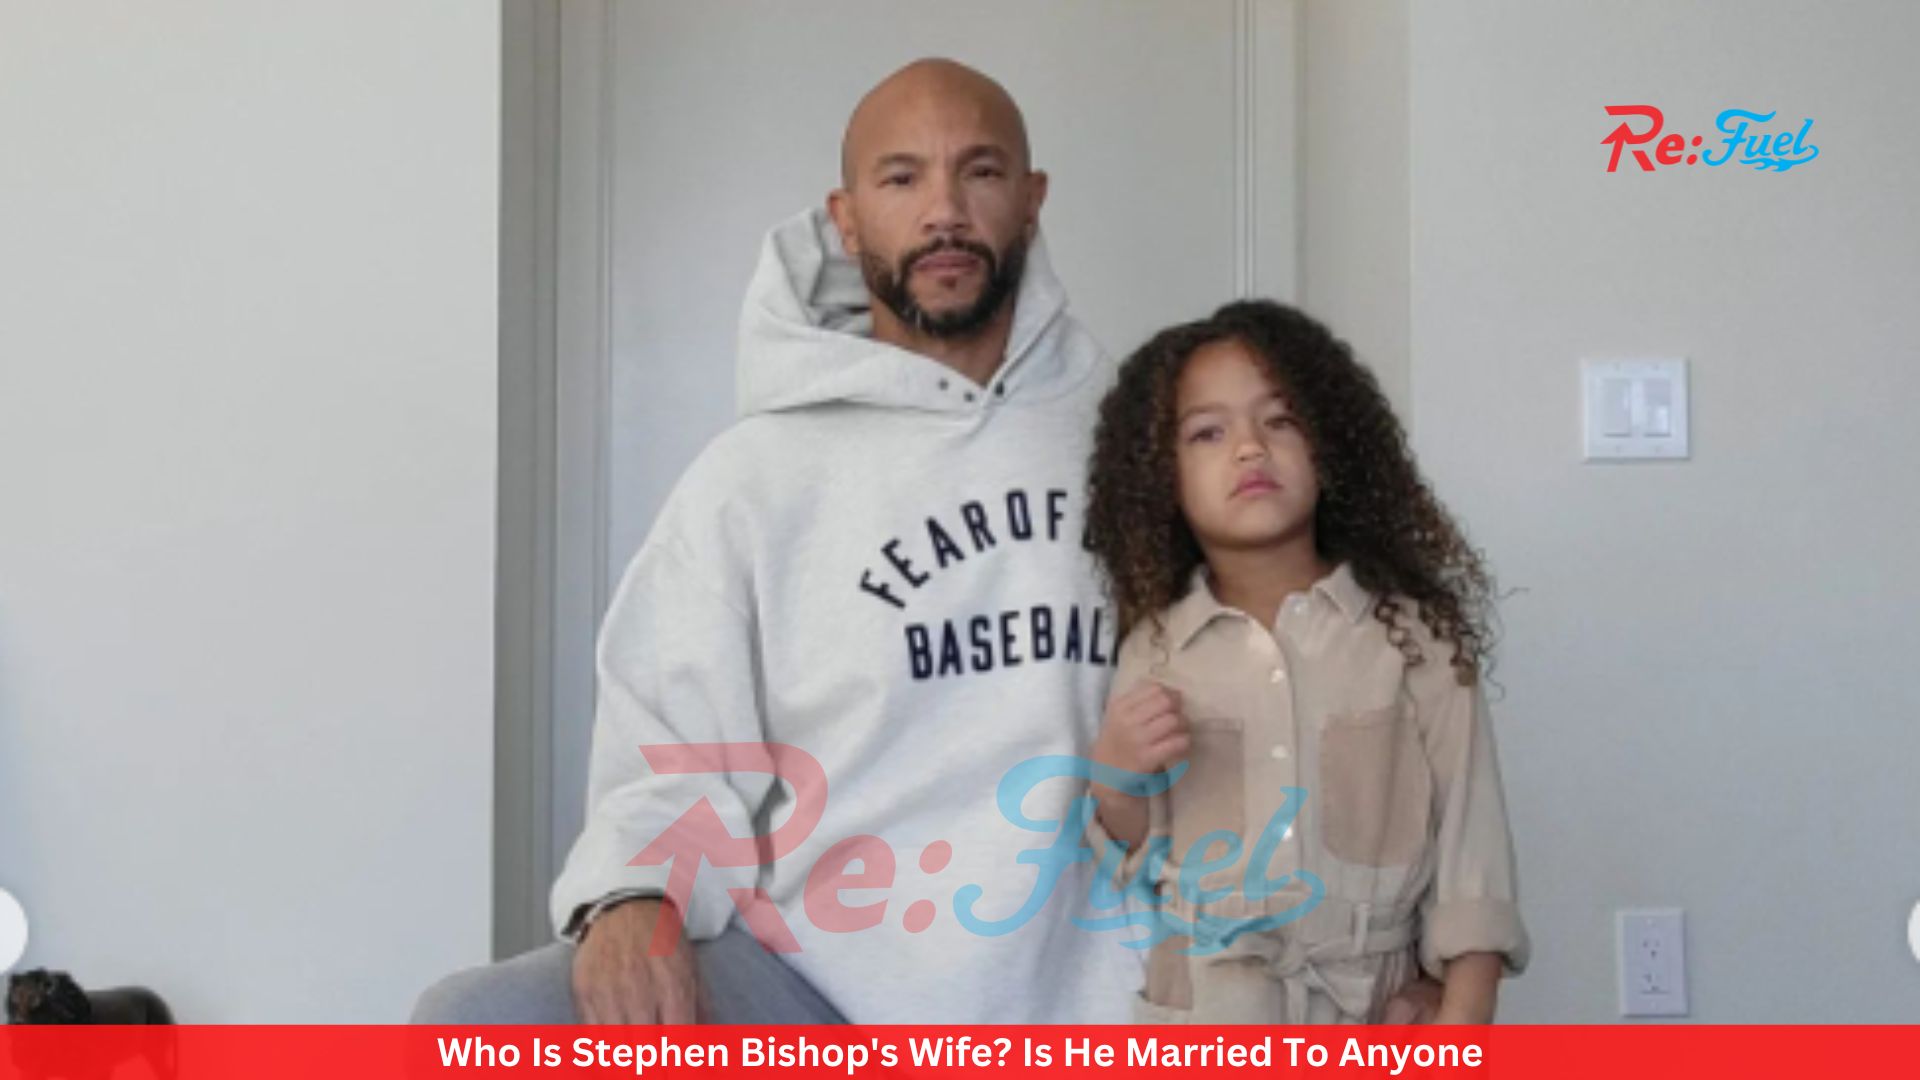 Who Is Stephen Bishop's Wife? Is He Married To Anyone